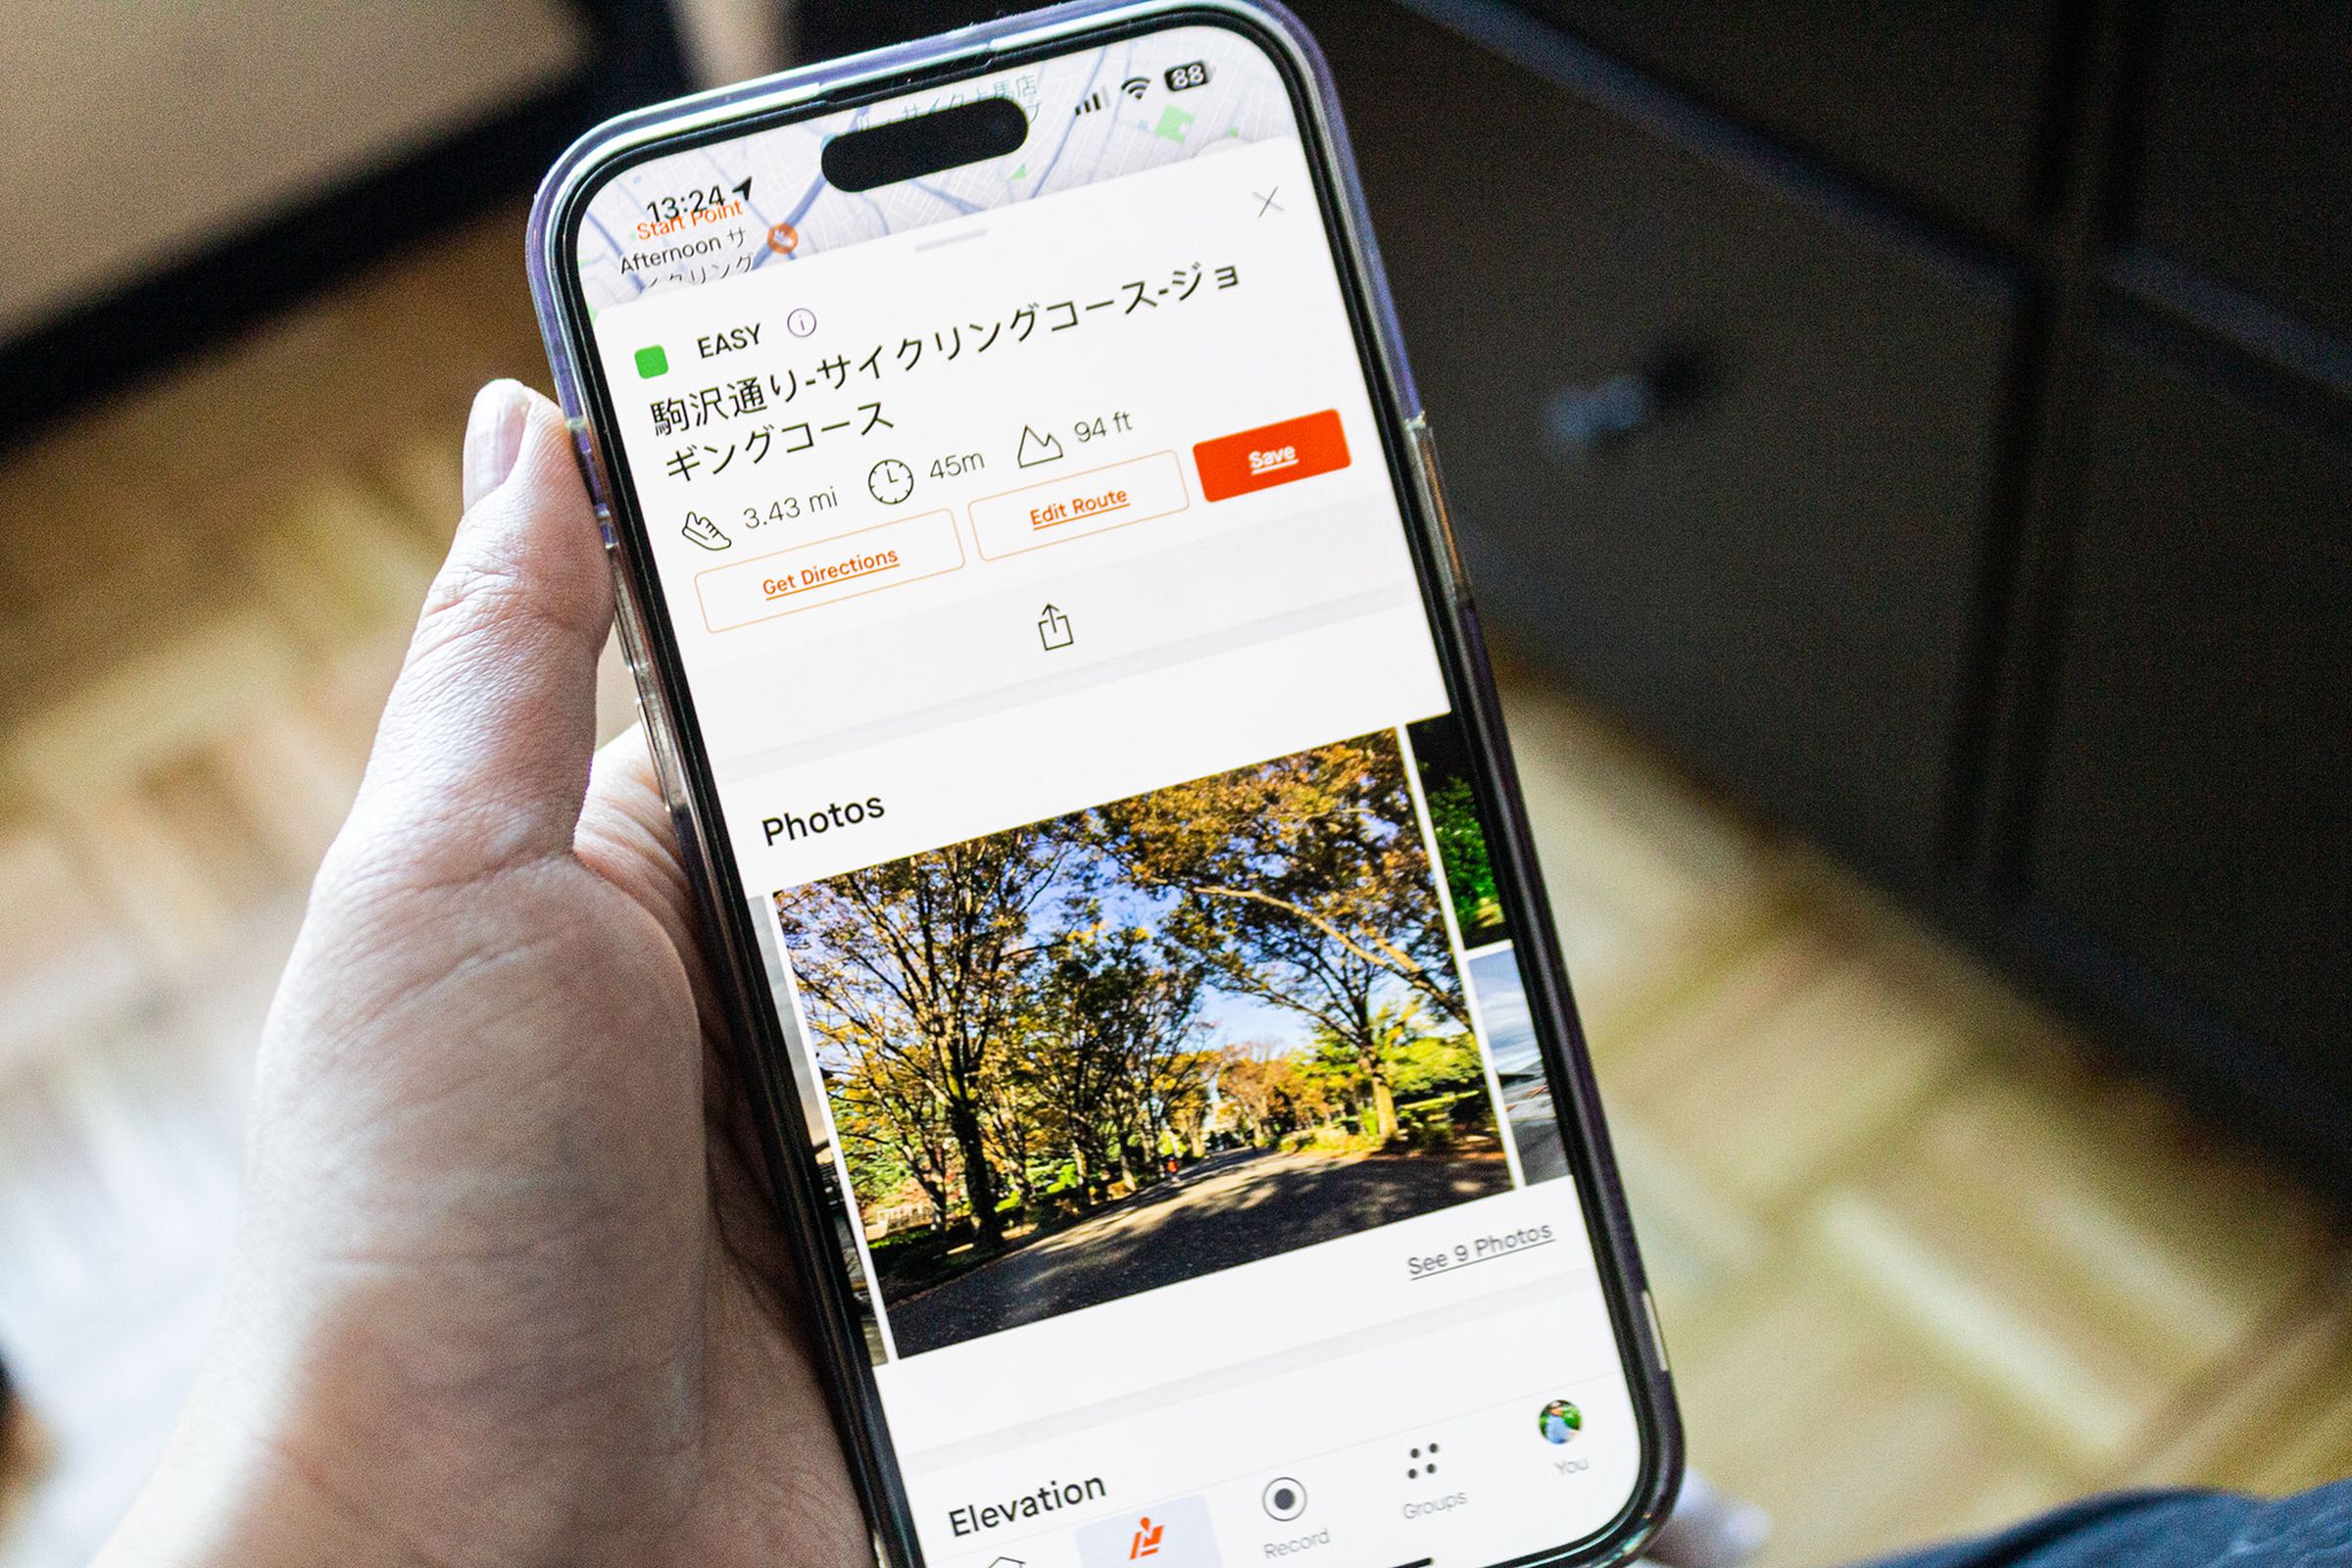 Person holding iPhone showing the new Strava Recommended Routes photo feature with a route in Tokyo.